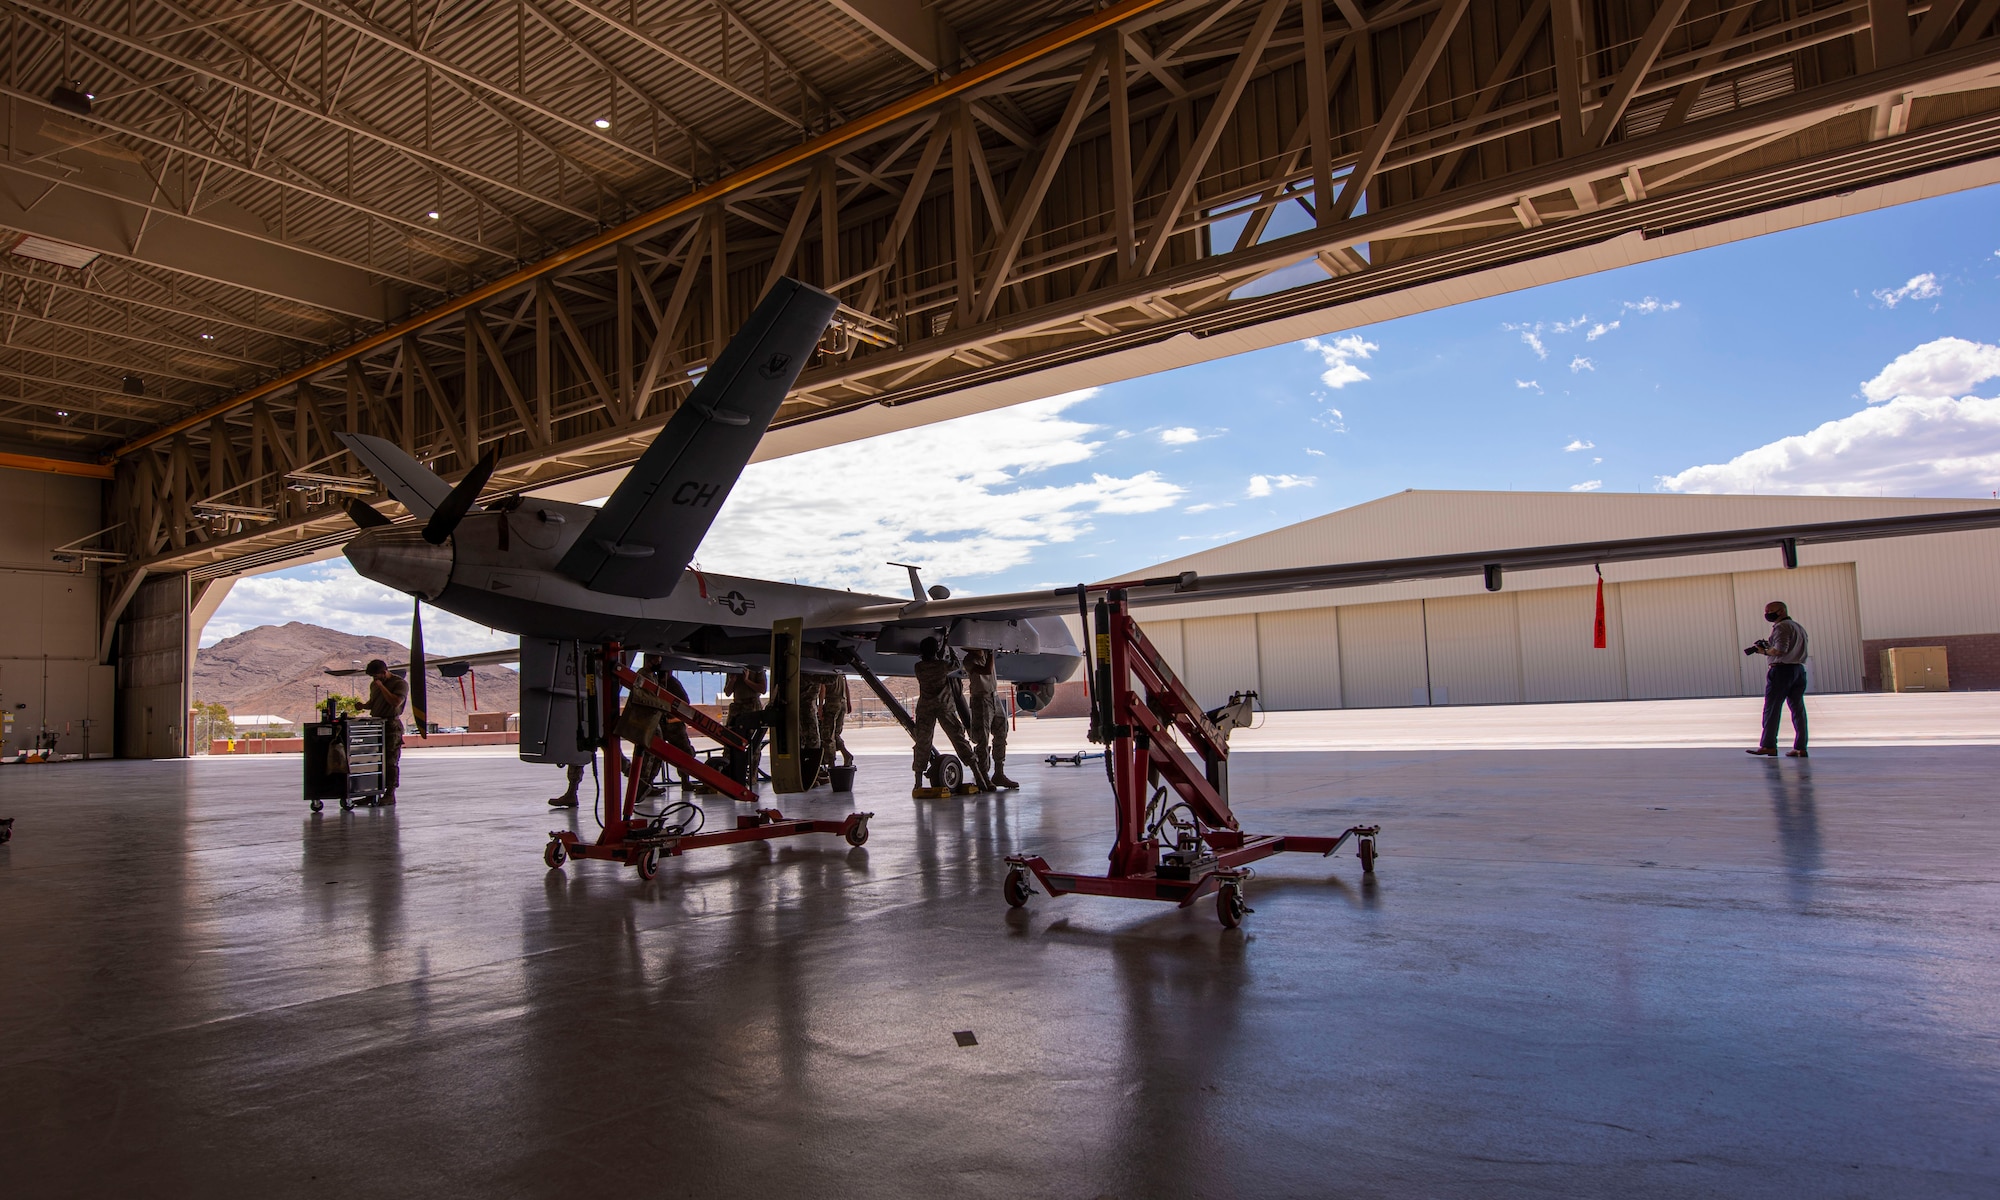 An MQ-9 Reaper sits in a hangar with 5 members preparing to conduct routine maintenance.